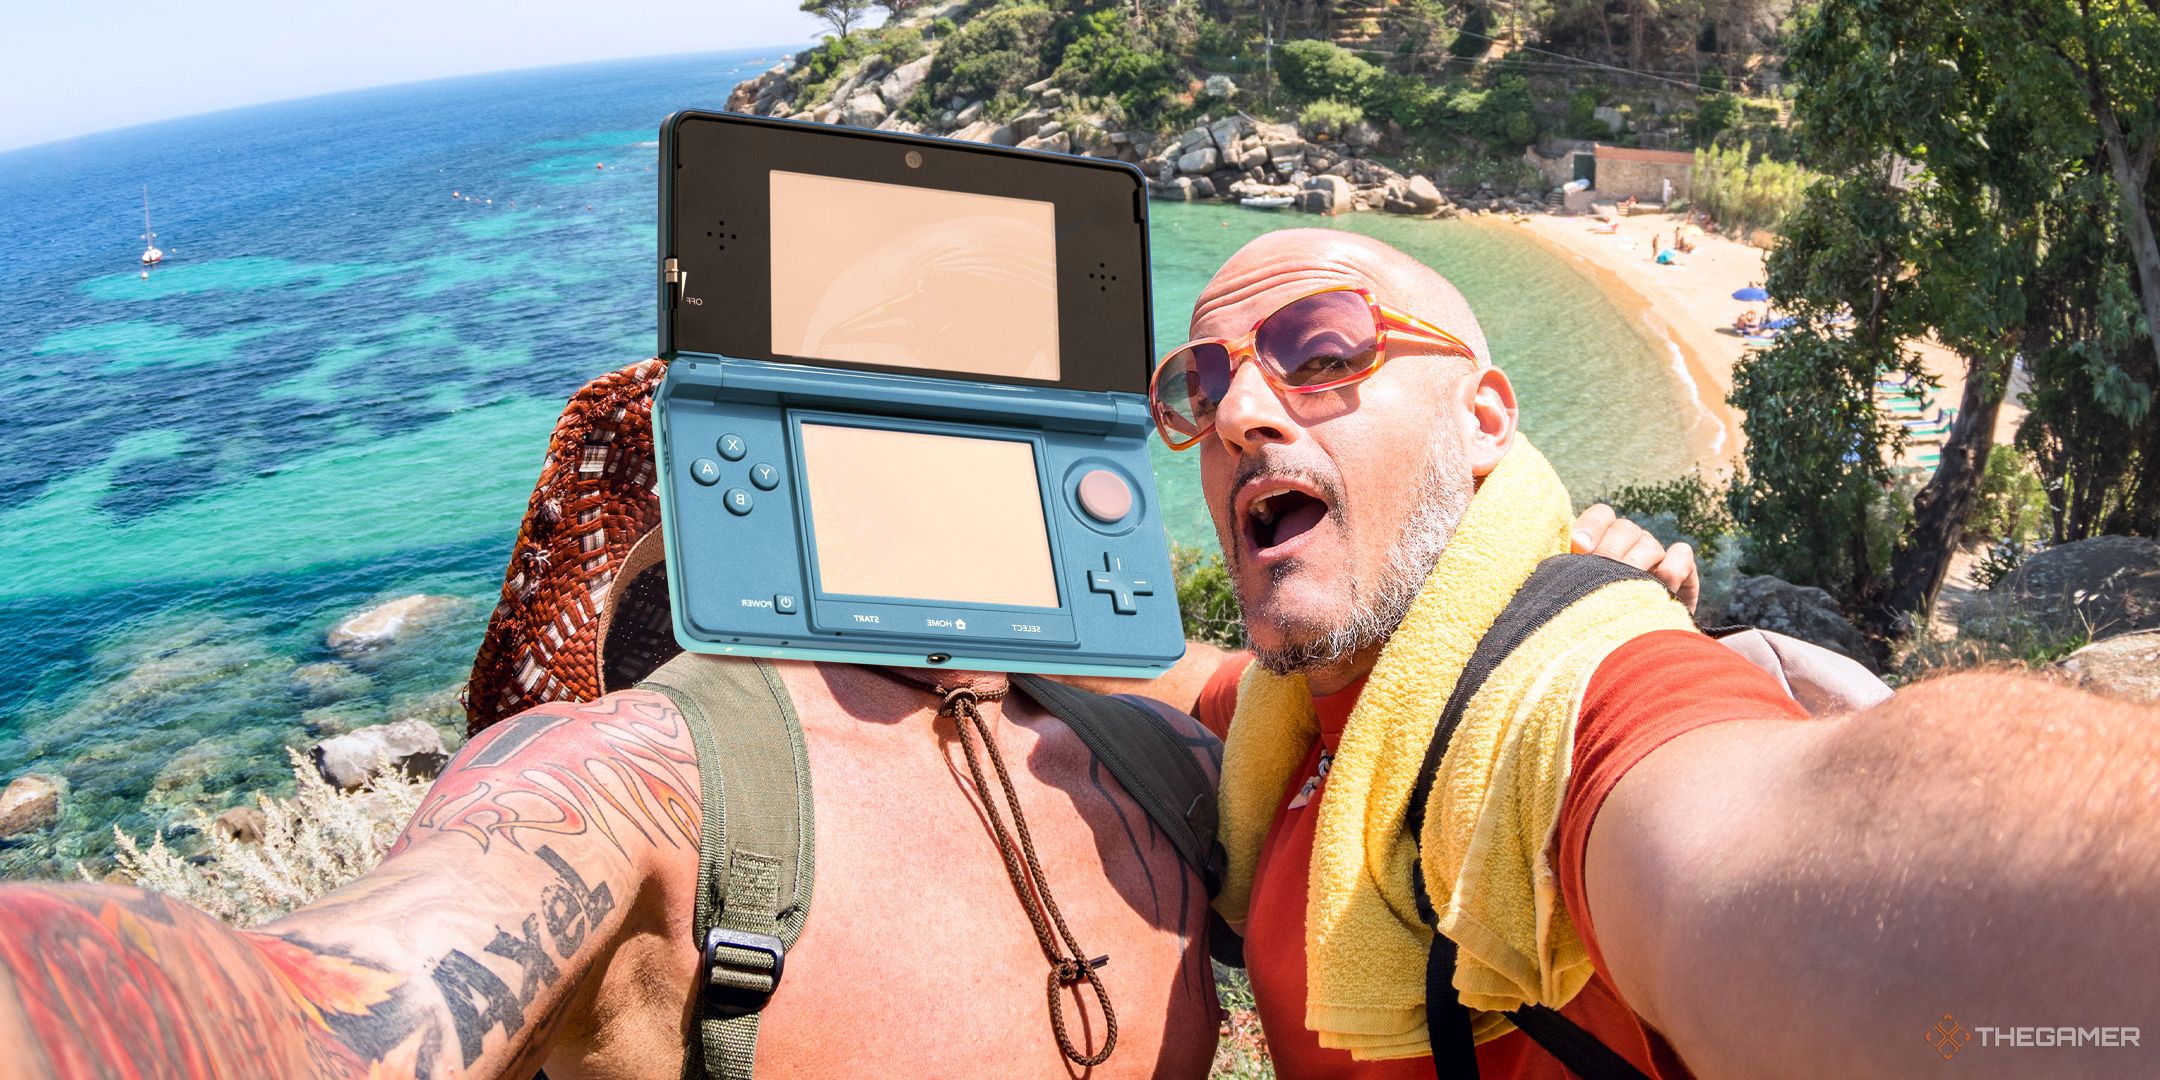 A man taking a selfie with a Nintendo 3DS